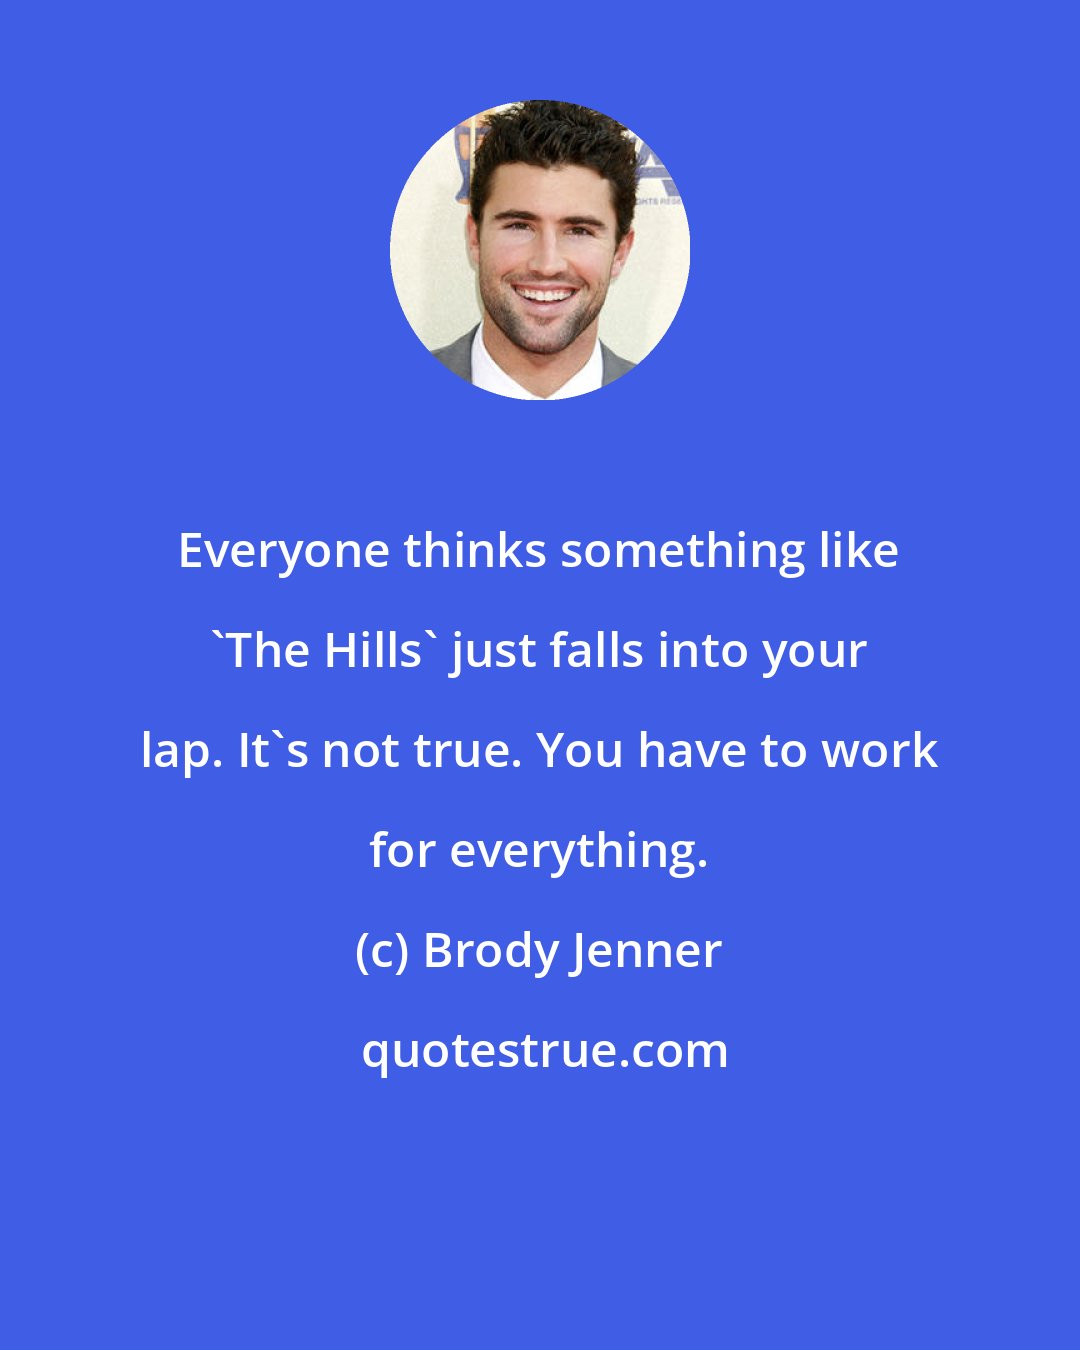 Brody Jenner: Everyone thinks something like 'The Hills' just falls into your lap. It's not true. You have to work for everything.